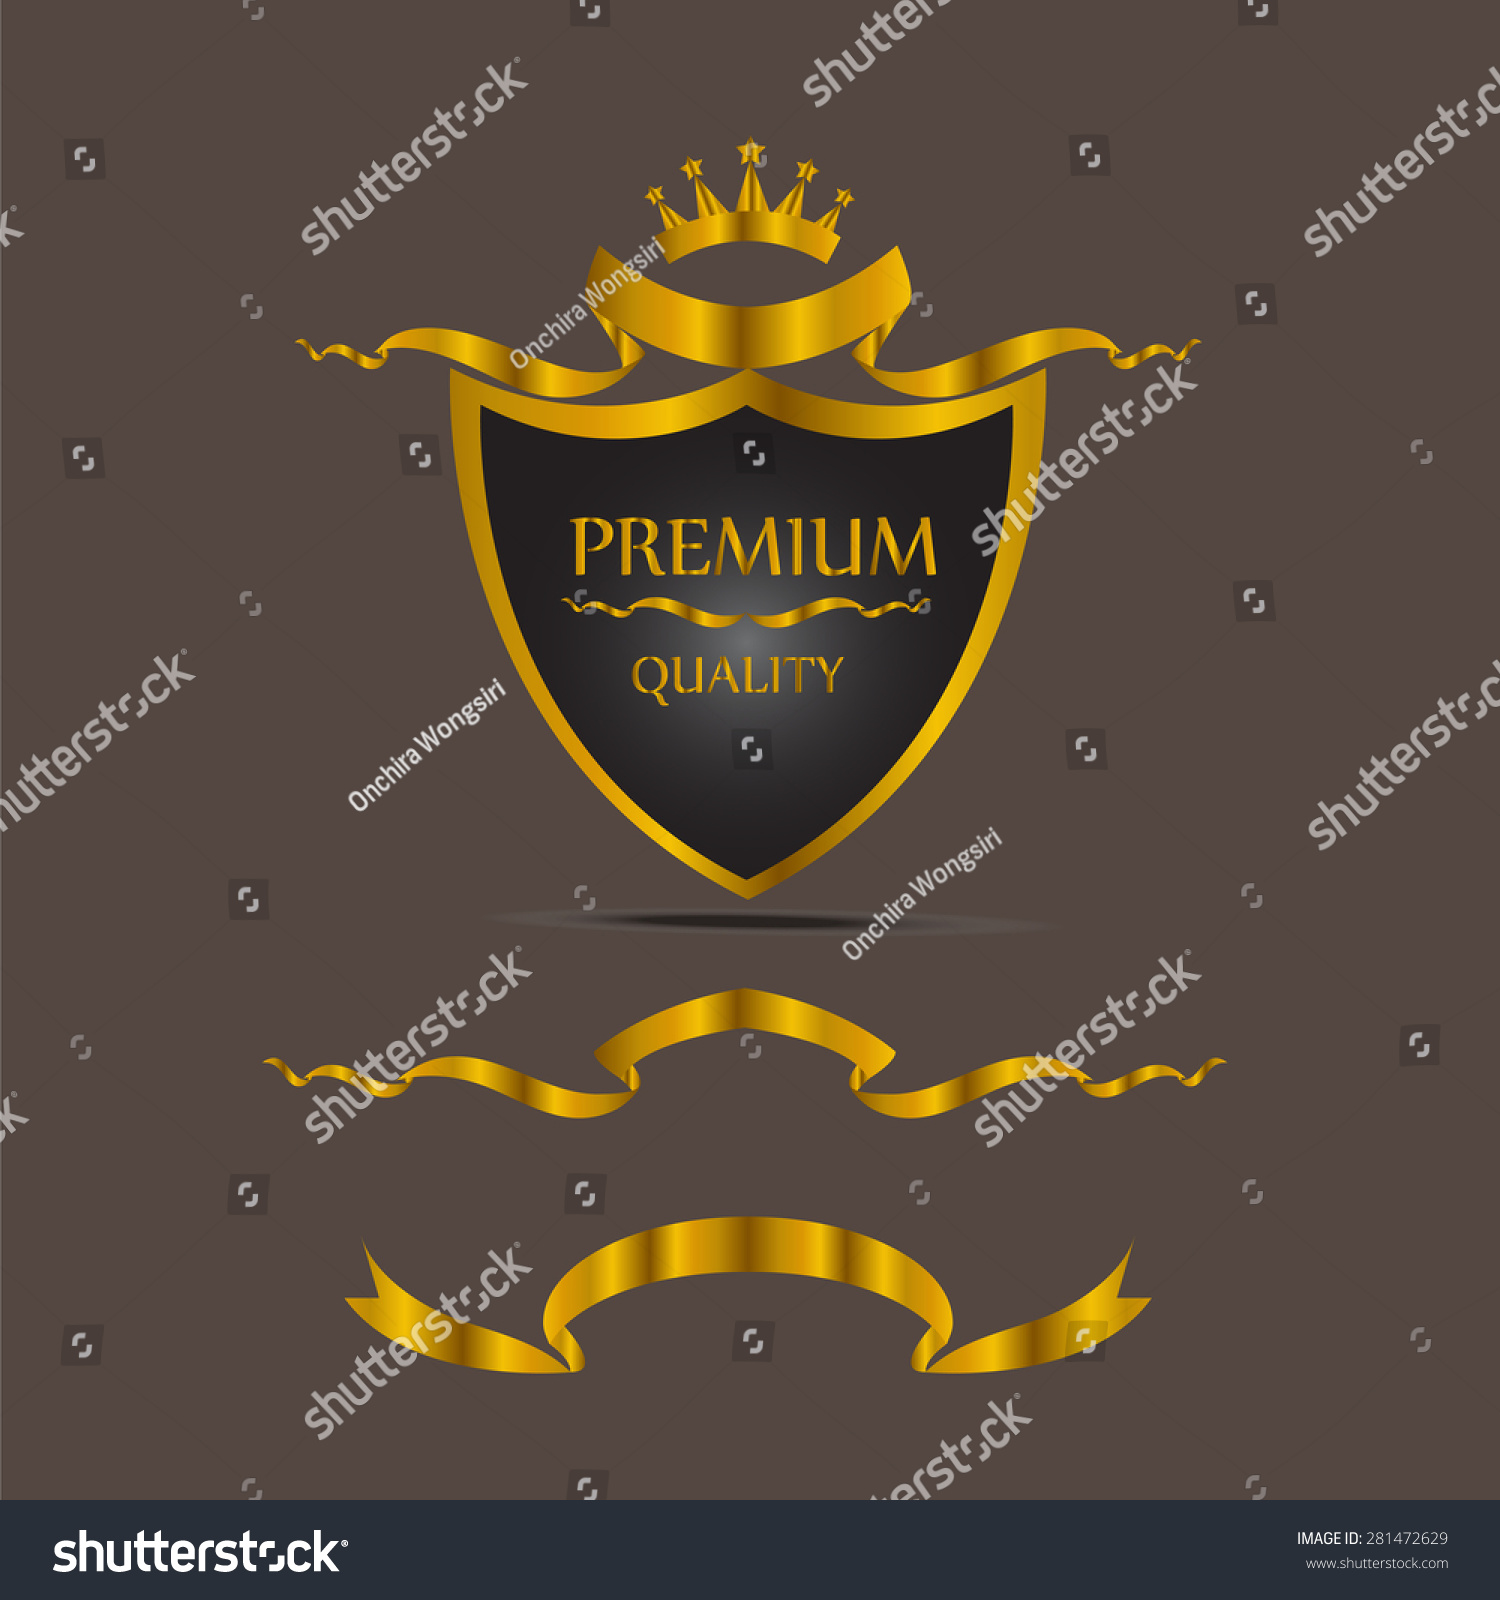 Premium Quality Label Gold Style Vector Stock Vector (Royalty Free ...